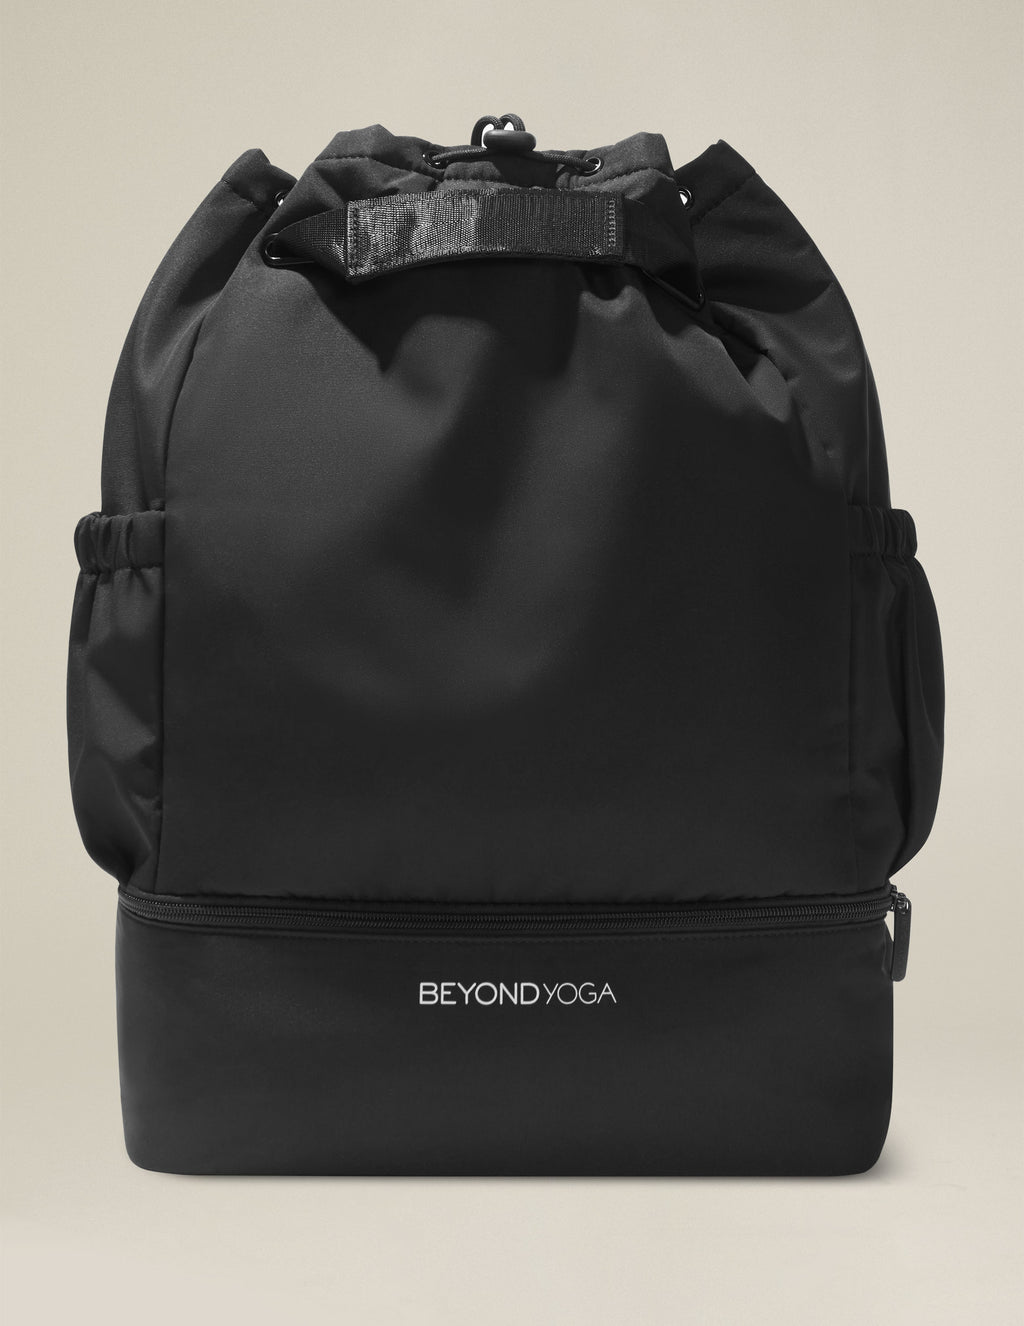 Convertible Gym Bag Featured Image